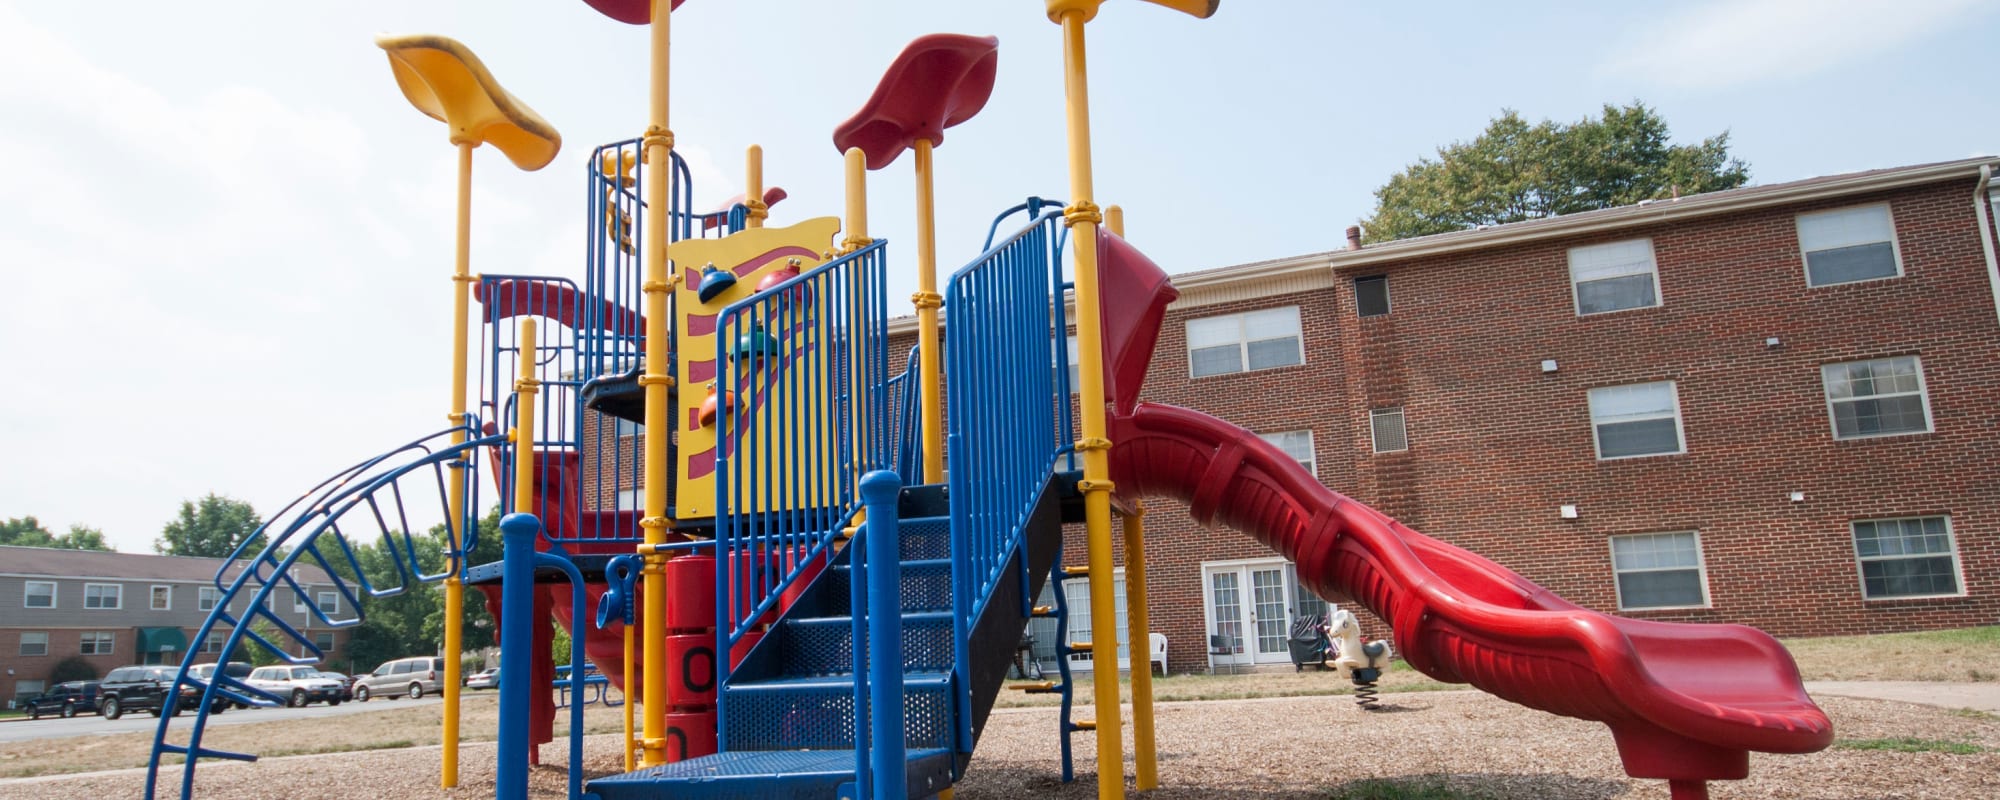 Our apartments in Manassas, Virginia offer a playground